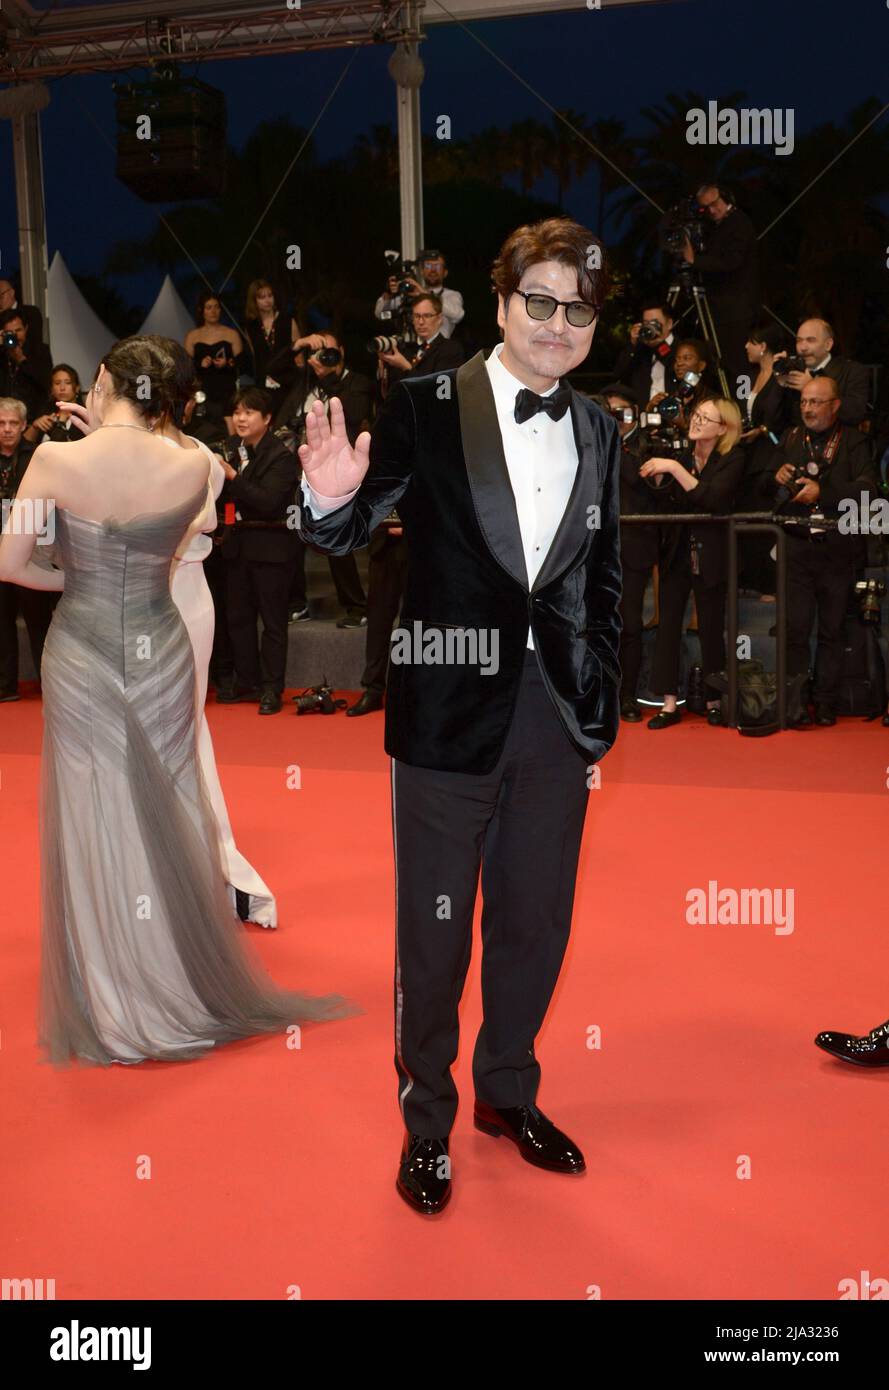 May 26, 2022, CANNES, France: CANNES, FRANCE - MAY 26: Song Kang-Ho, Hee-jin Choi, Joo-Young Lee and Dong-won Gang depart the screening of ''Broker (Les Bonnes Etoiles)'' during the 75th annual Cannes film festival at Palais des Festivals on May 26, 2022 in Cannes, France. (Credit Image: © Frederick Injimbert/ZUMA Press Wire) Stock Photo